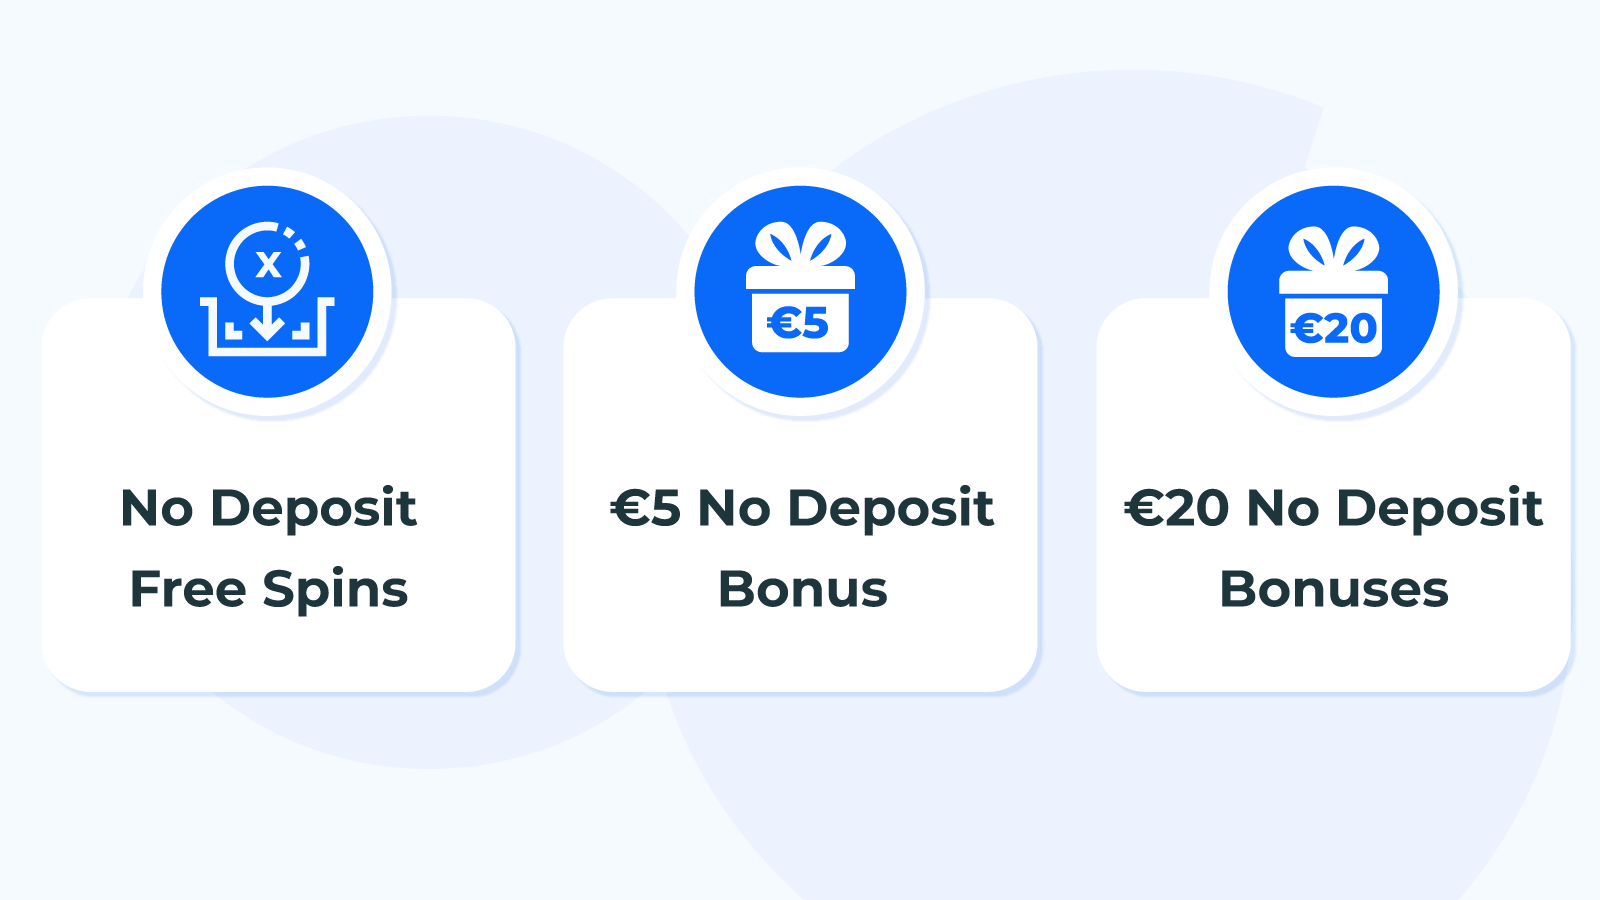 Other Free Spins and No Deposit Bonus Offers